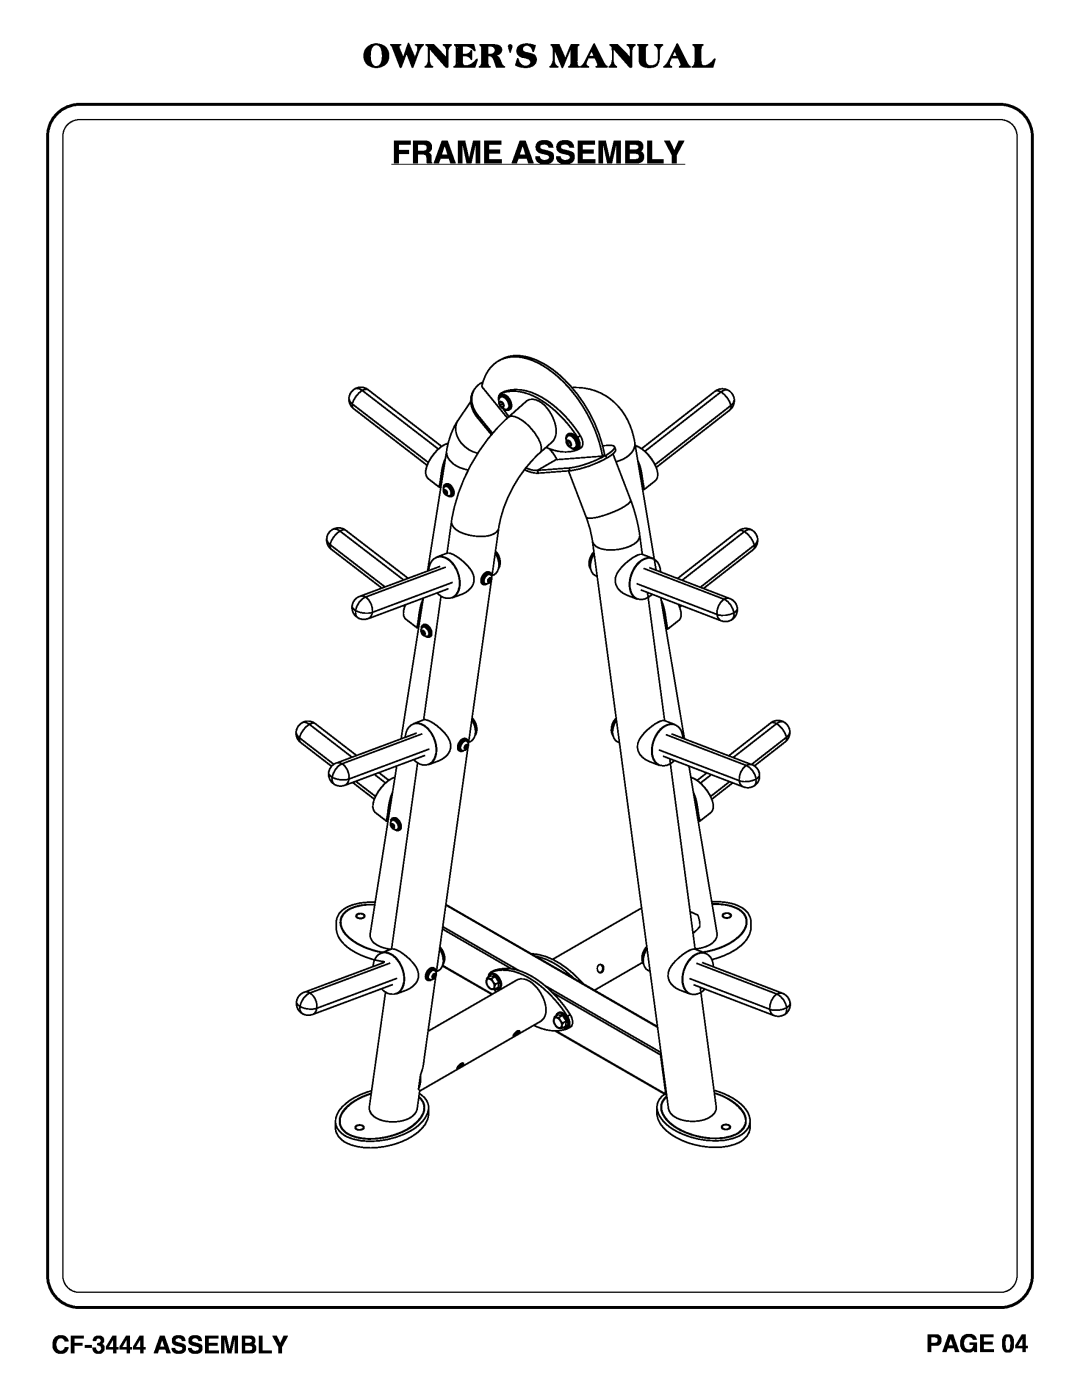 Hoist Fitness cf-3444 owner manual Owners Manual Frame Assembly, CF-3444 ASSEMBLY, Page 